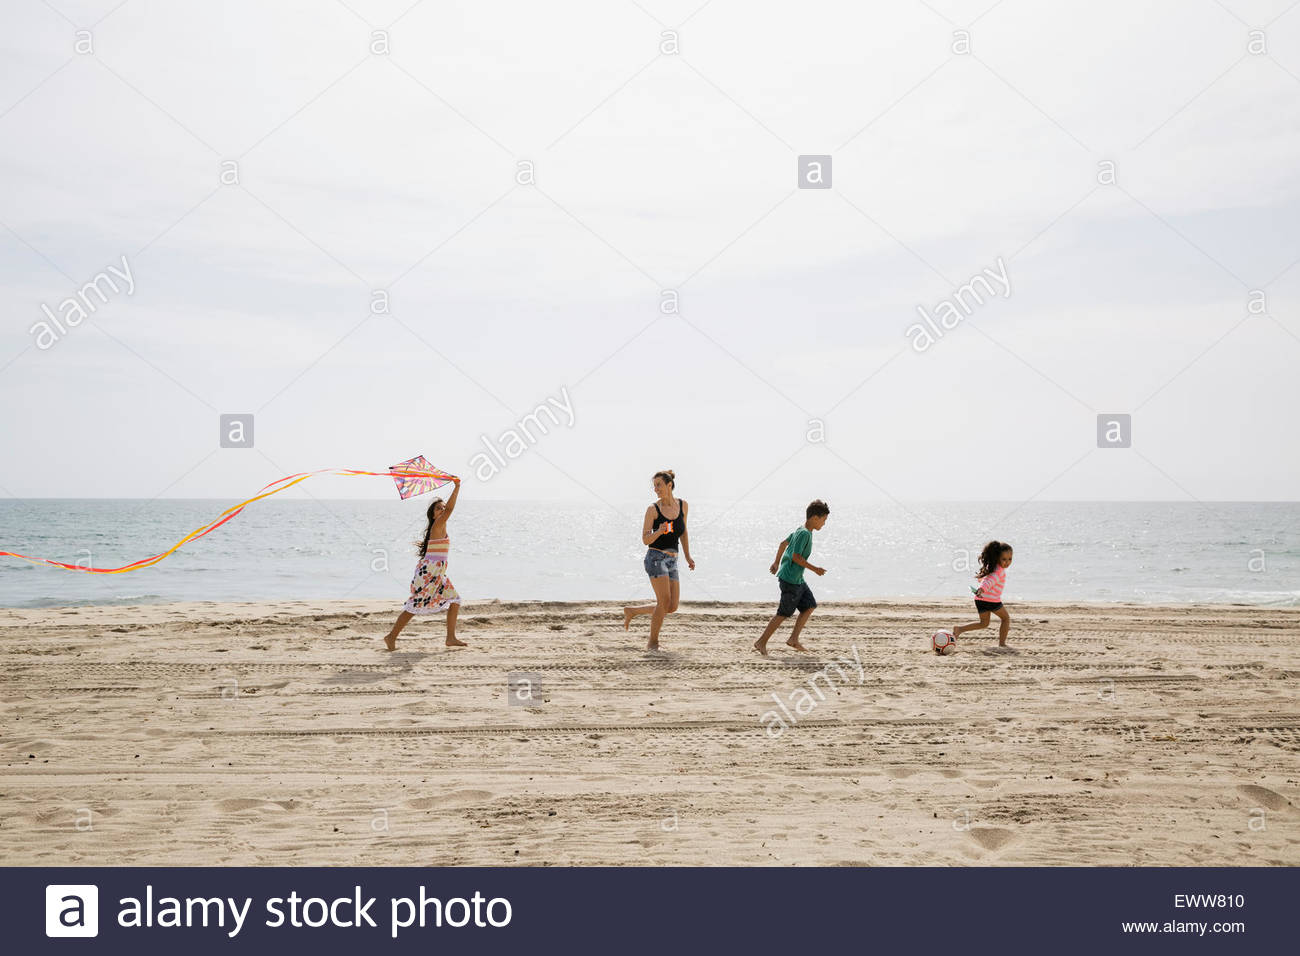 Family on sunny beach Banque D'Images